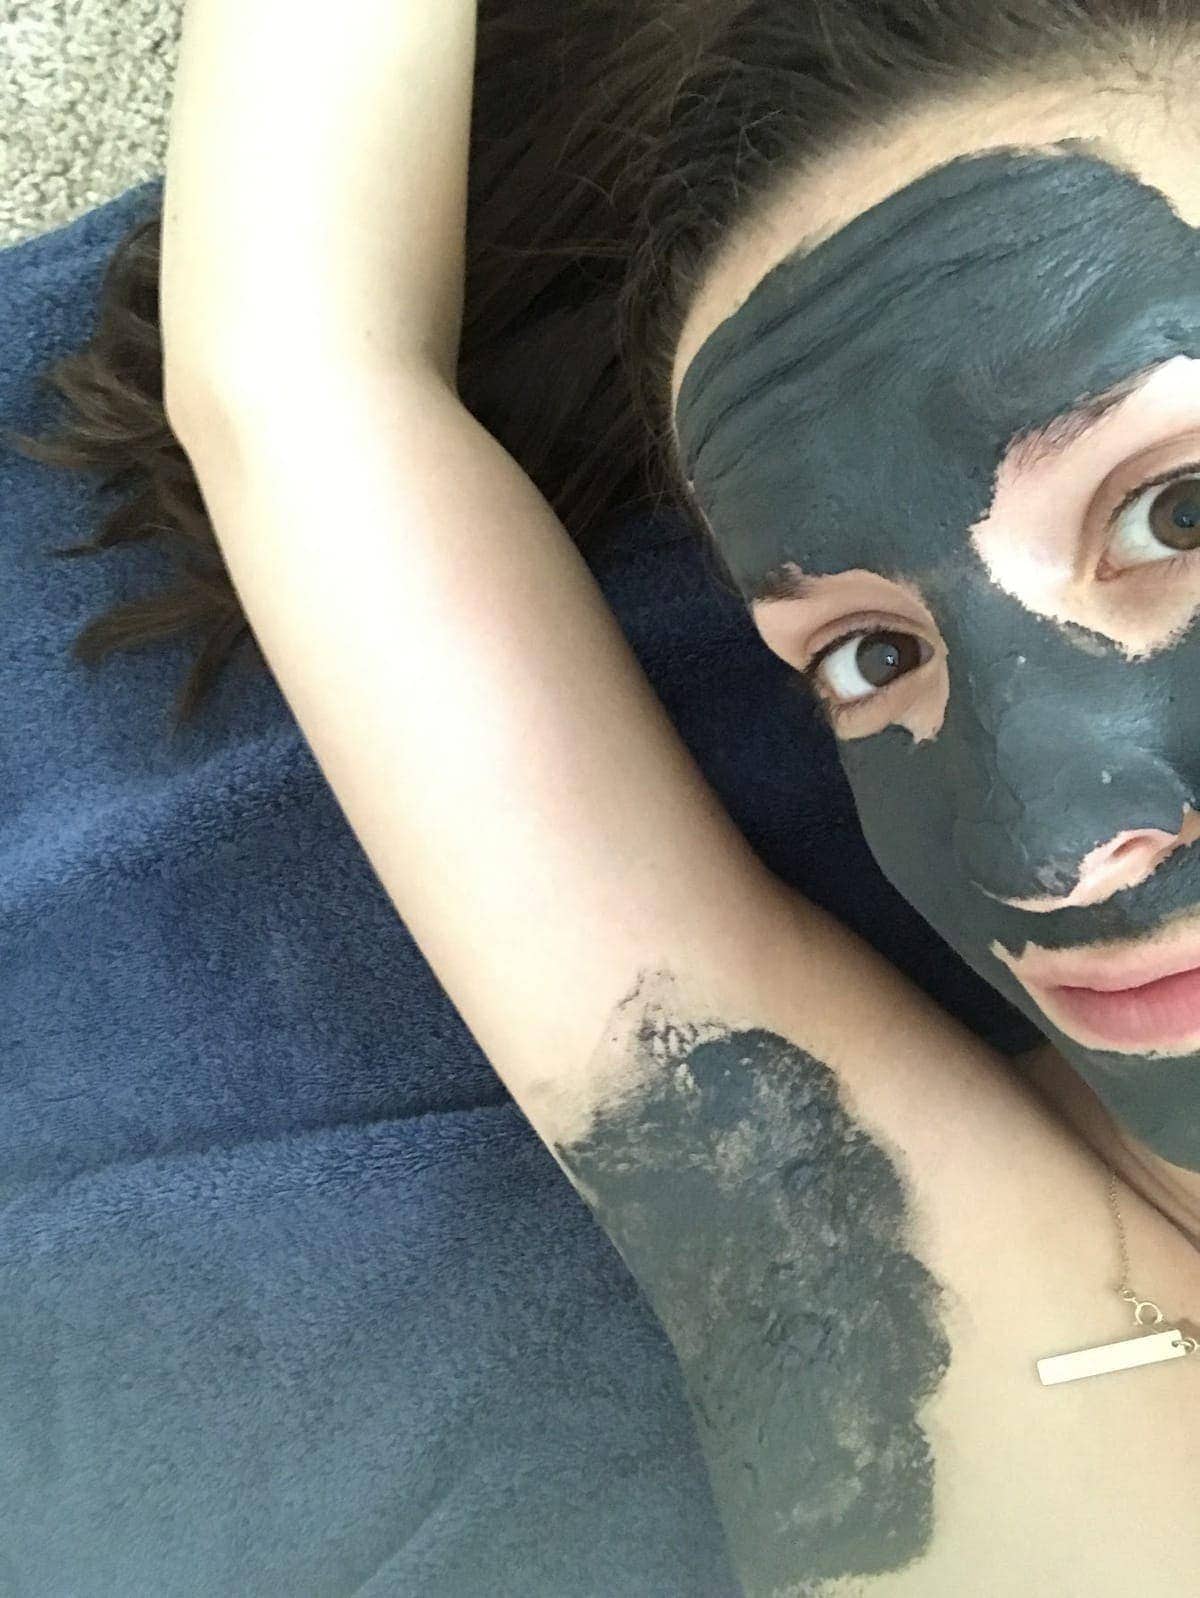 Cheryl lying on a towel with her arm above her head, with a charcoal mask applied to her face and her underarm before using natural deodorant